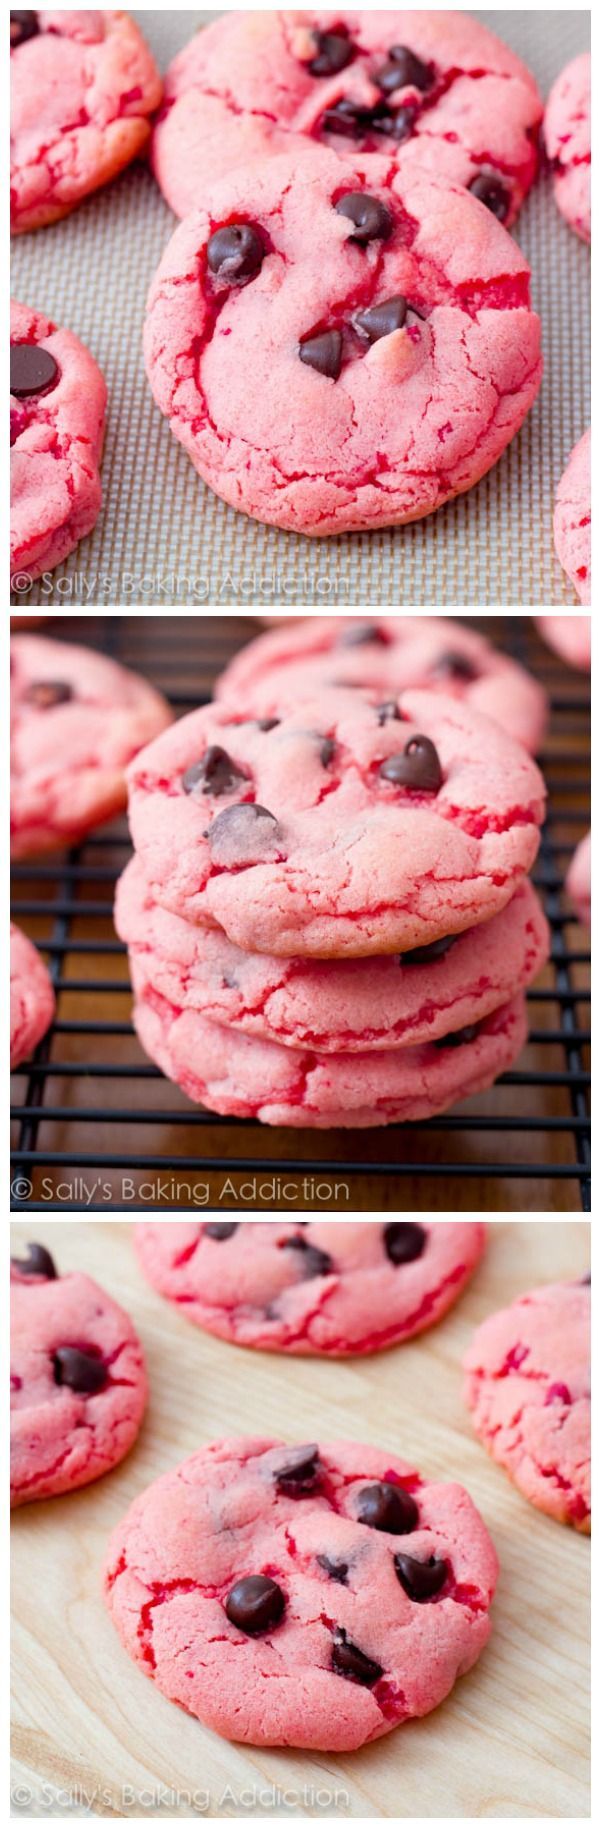 These simple, soft-baked Strawberry Chocolate Chip Cookies are one of my most po